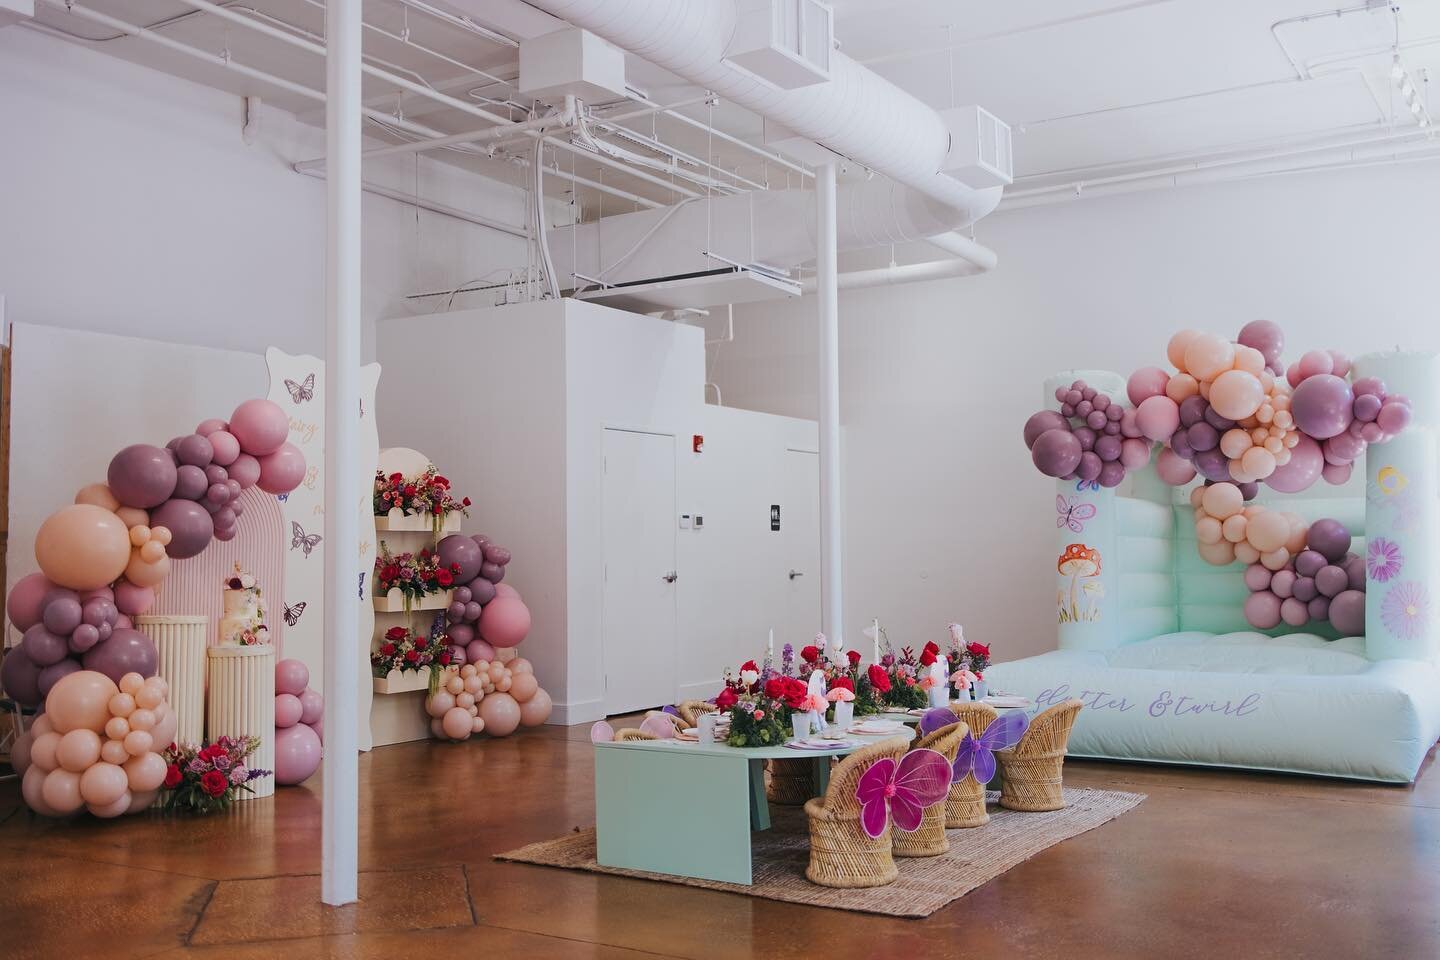 what happens when our studio meets the cutest enchanted party? 💜 butterflies and fairies galore!

Venue: @studiovandv
Planner: @alexalarberg
Photo: @veilandvinephoto
Floral: @everwildfloral
Bounce House: @thedallasparty
Bar Cart: @allure_and_alchemy